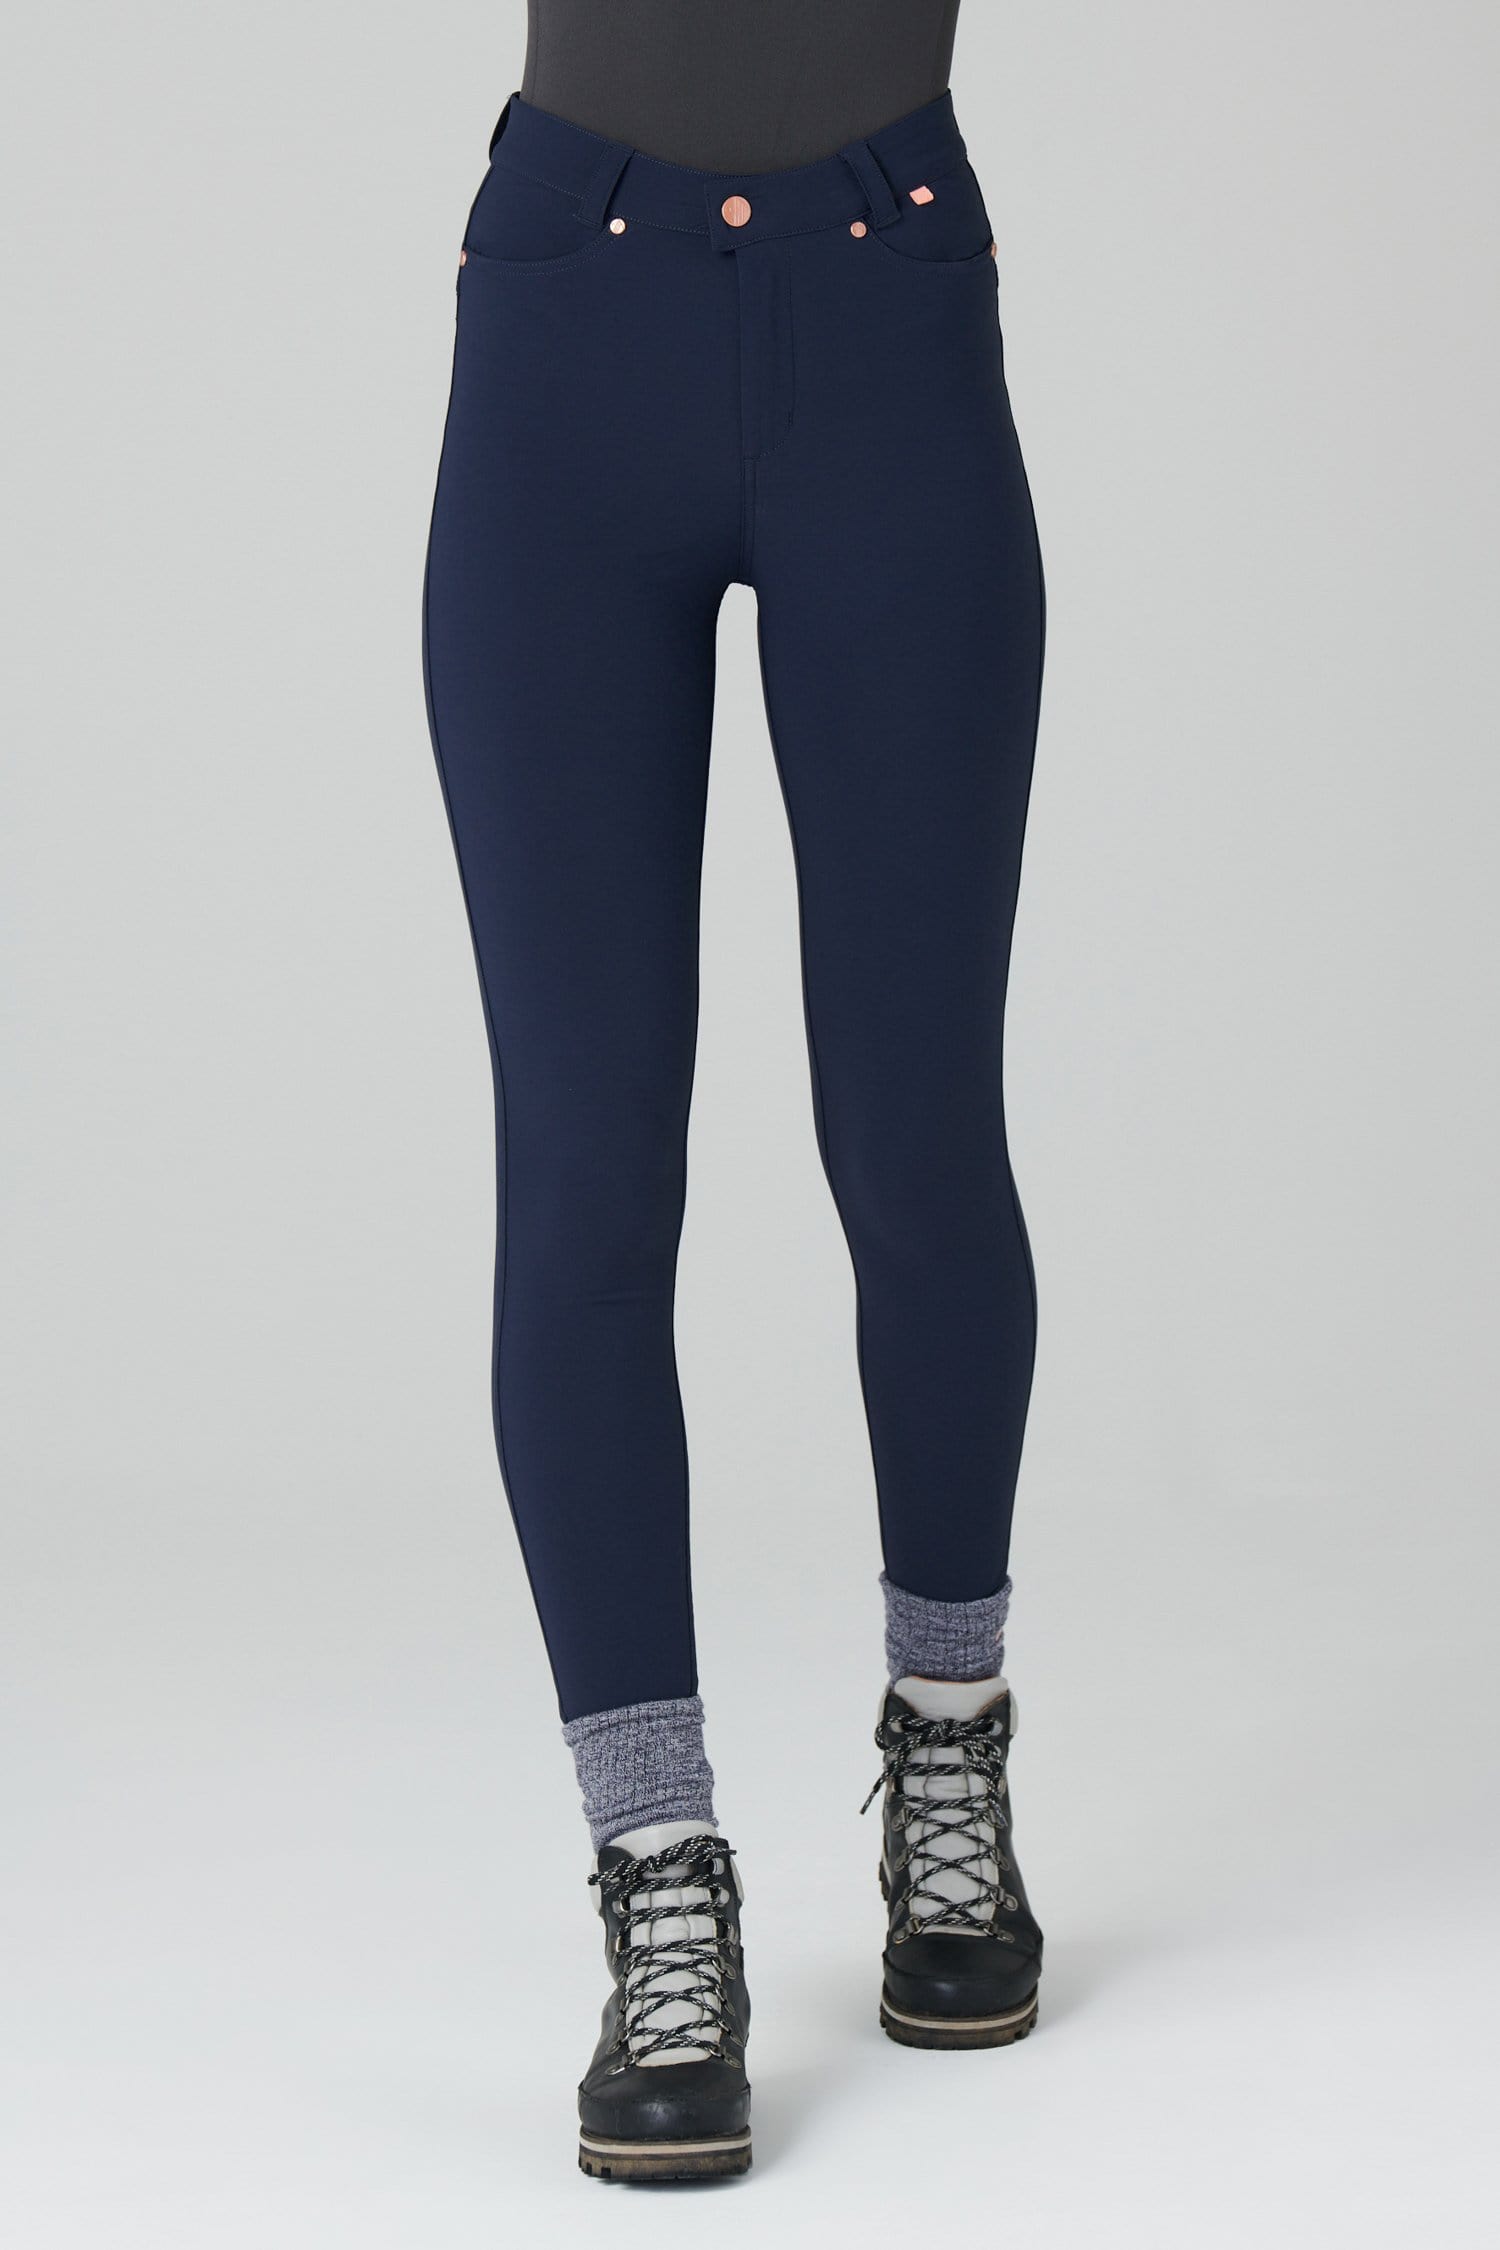 Max Stretch Skinny Outdoor Trousers - Deep Navy - 34l / Uk16 - Womens - Acai Outdoorwear